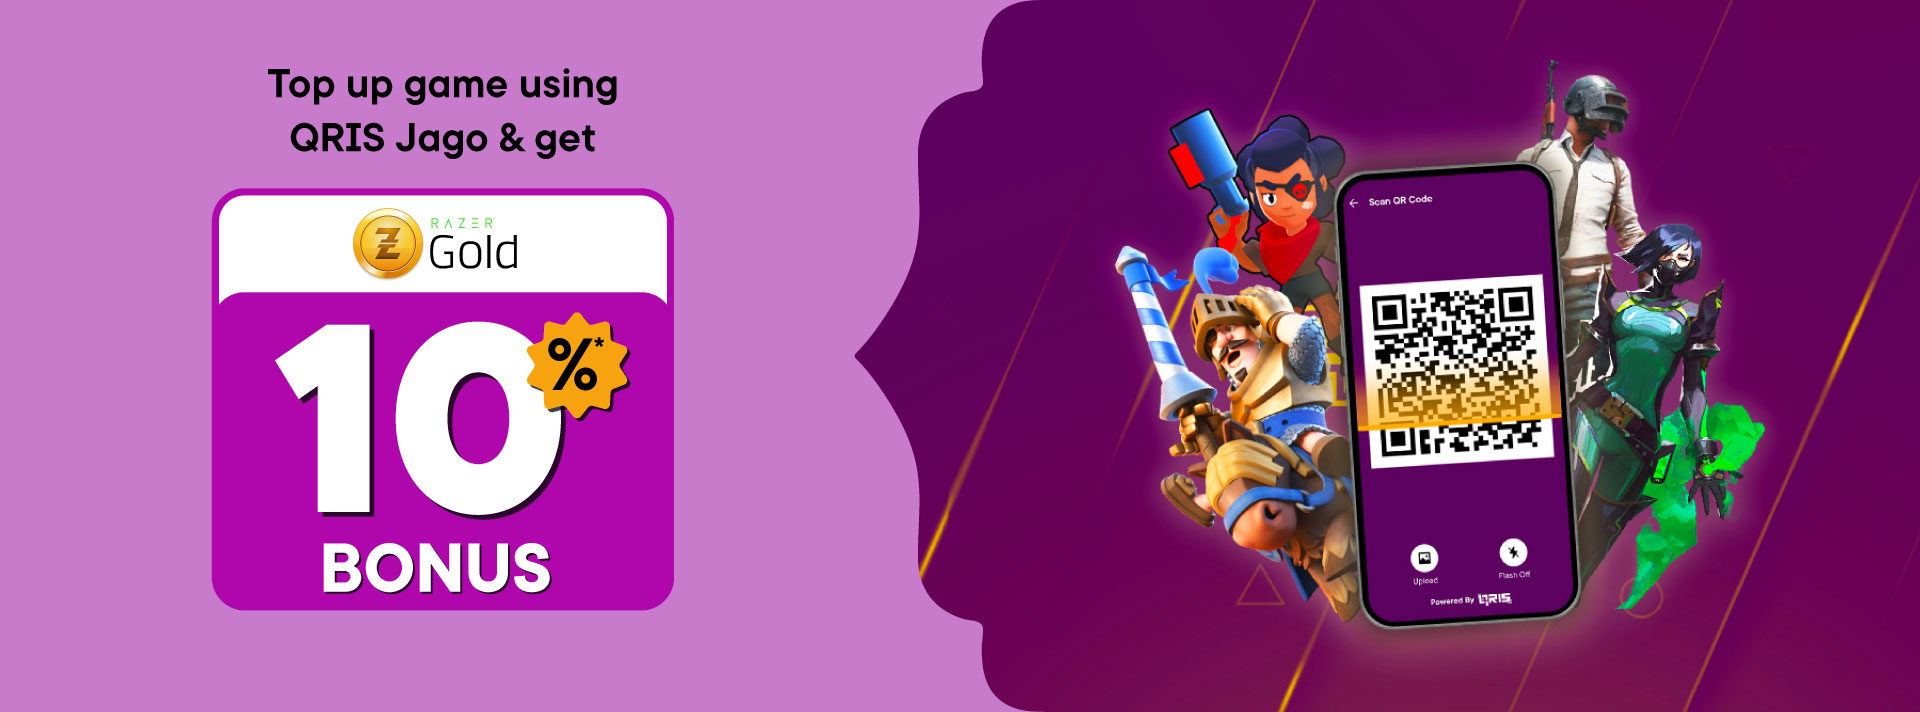 10% cashback for topping up your favorite game using Jago QRIS